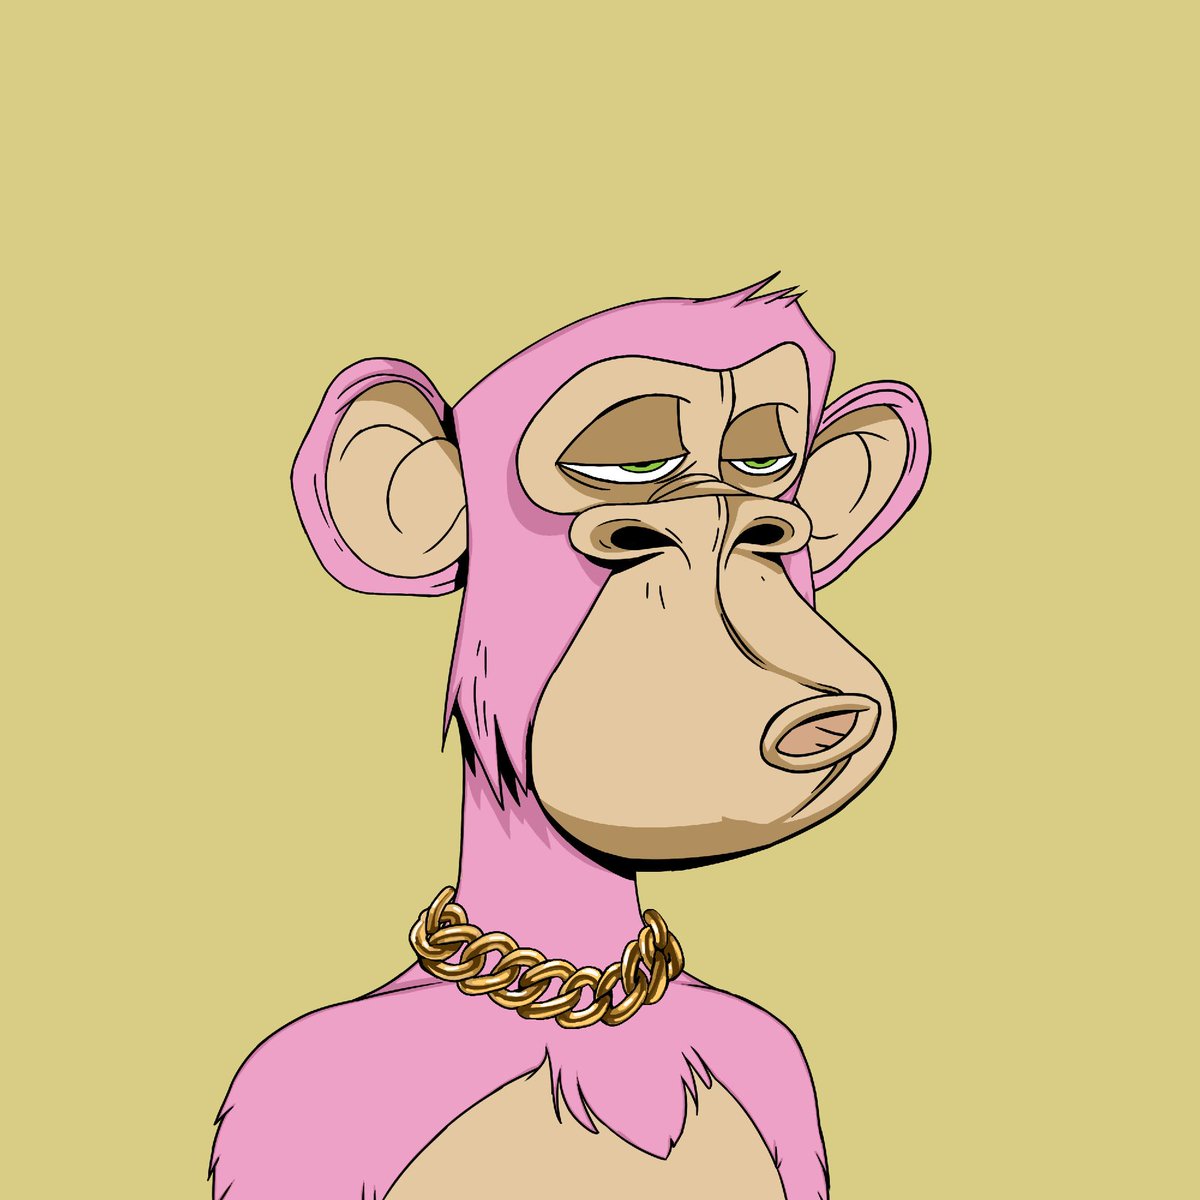 They said I could be anything, so I became a pink ape with a gold chain. Living the dream. 🐵😎 #JBAS #NFT #Metaverse